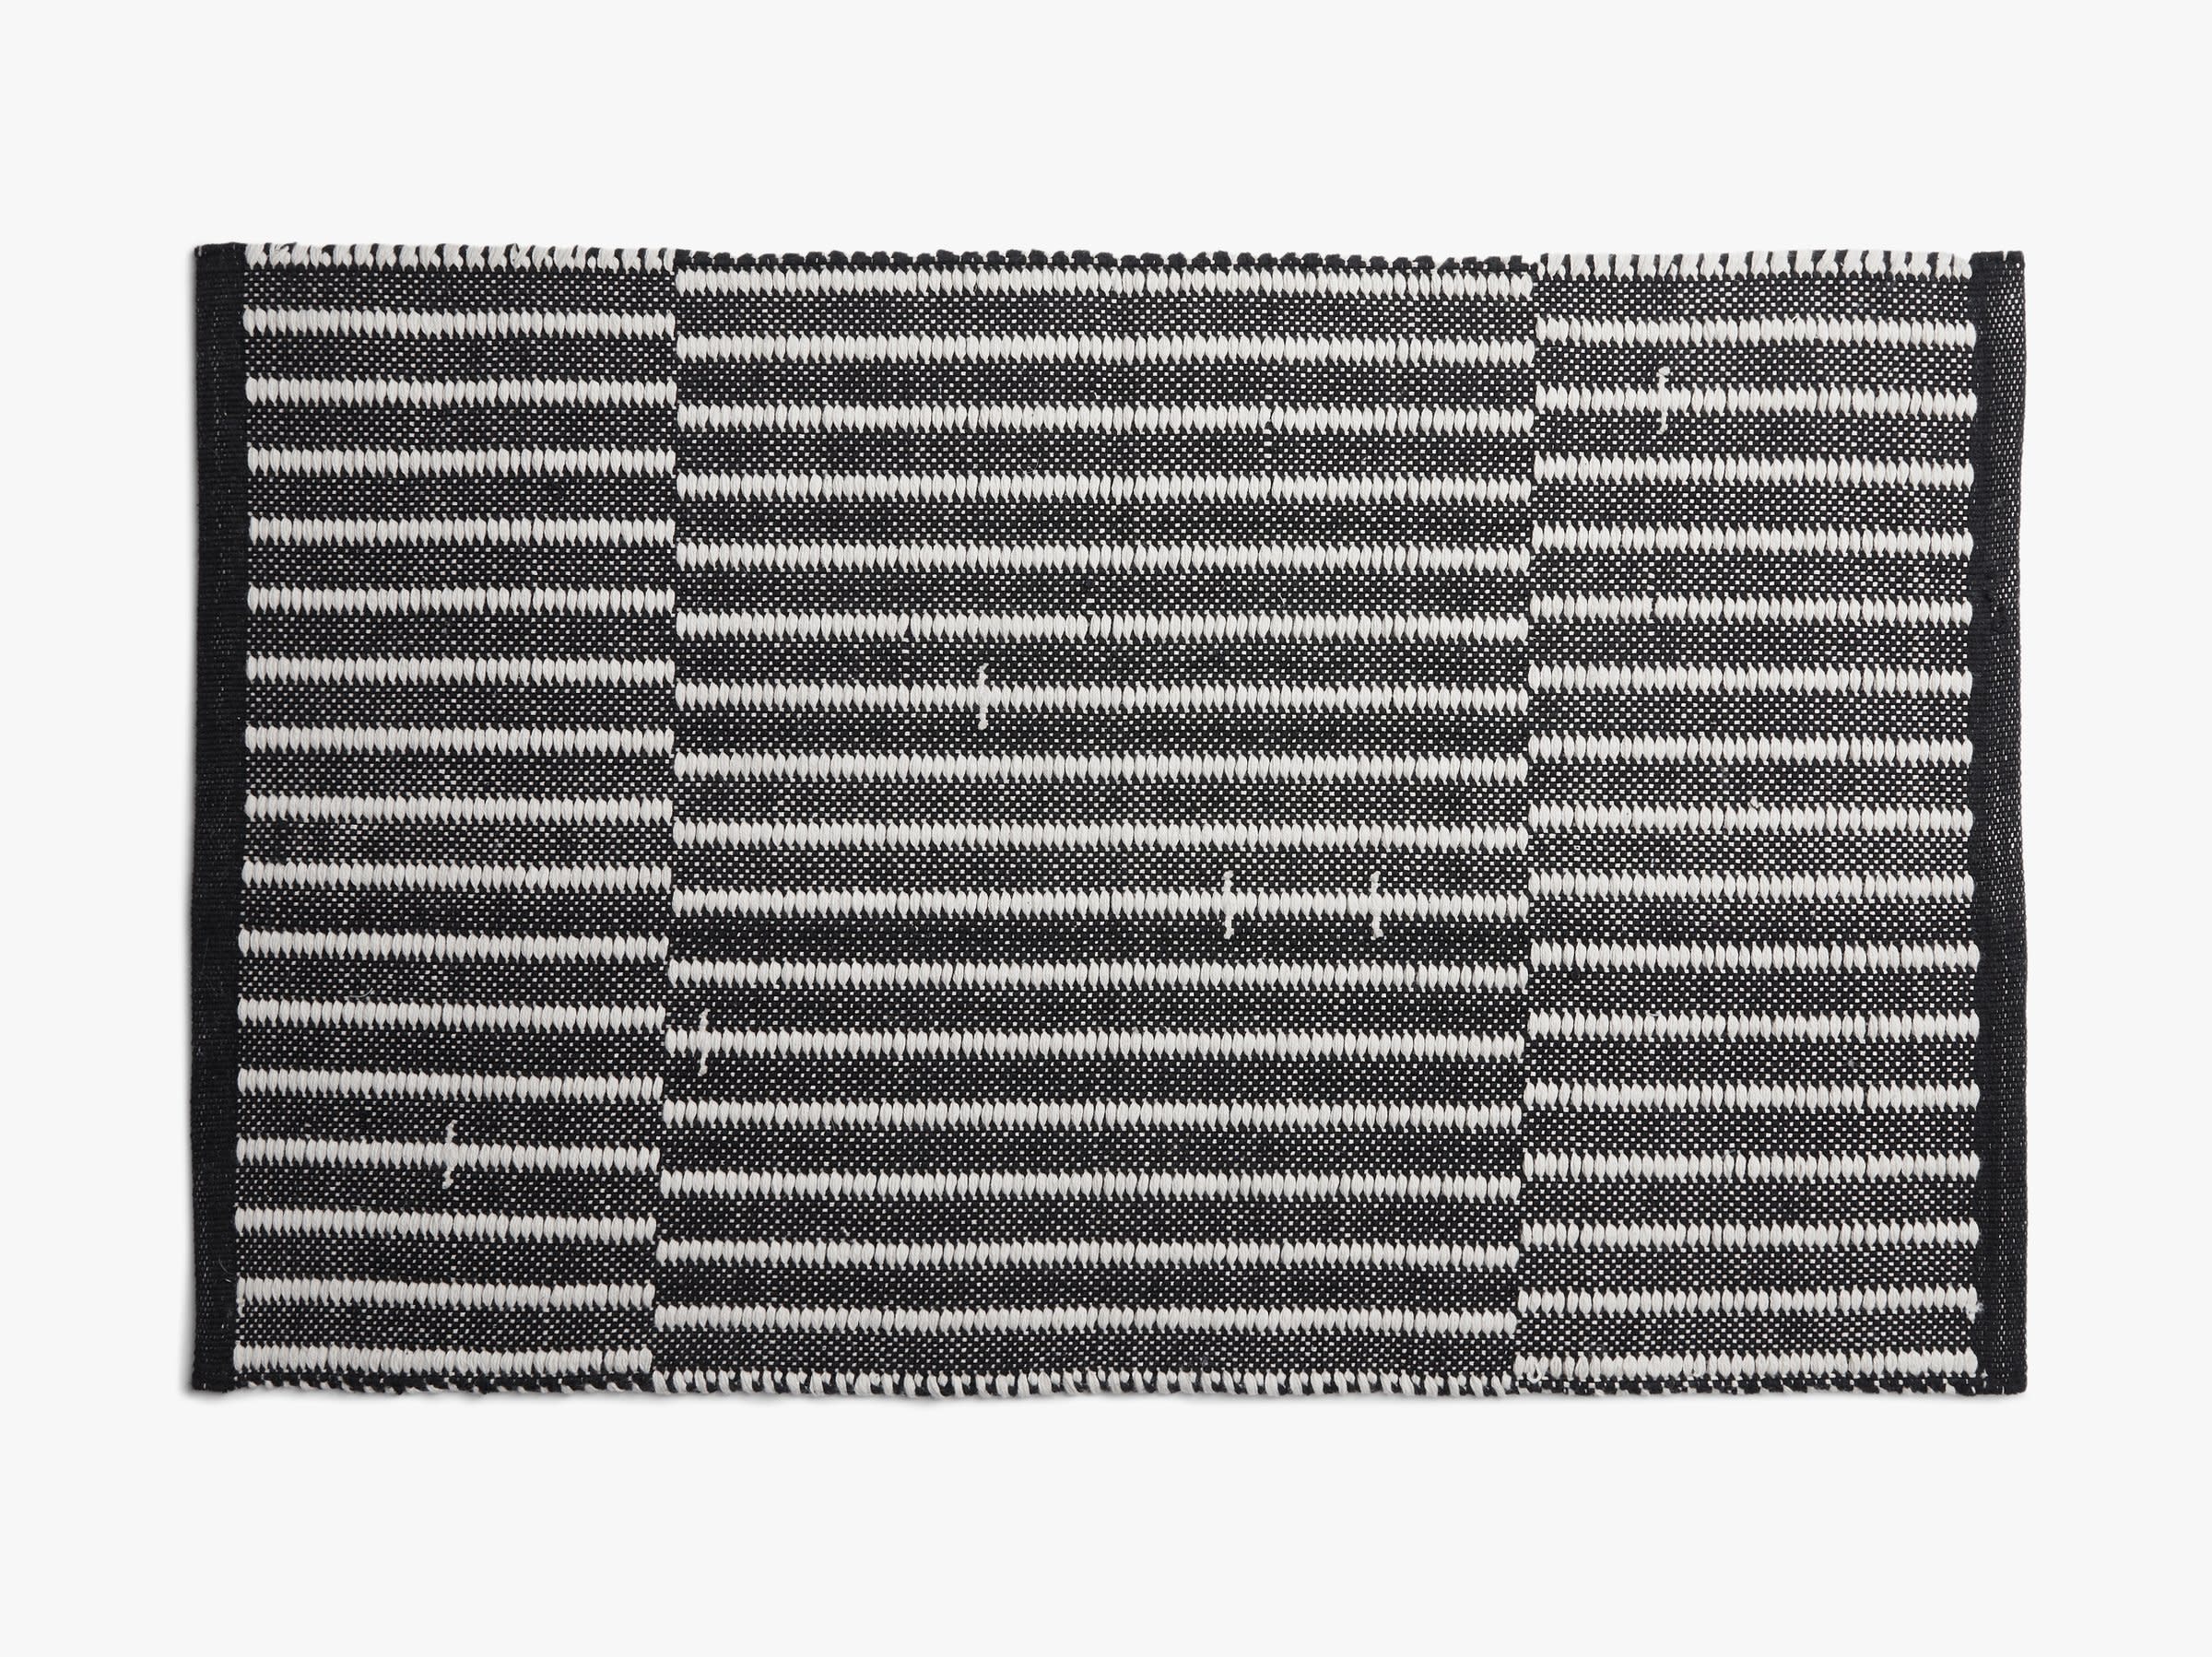 Striped Rug Product Image